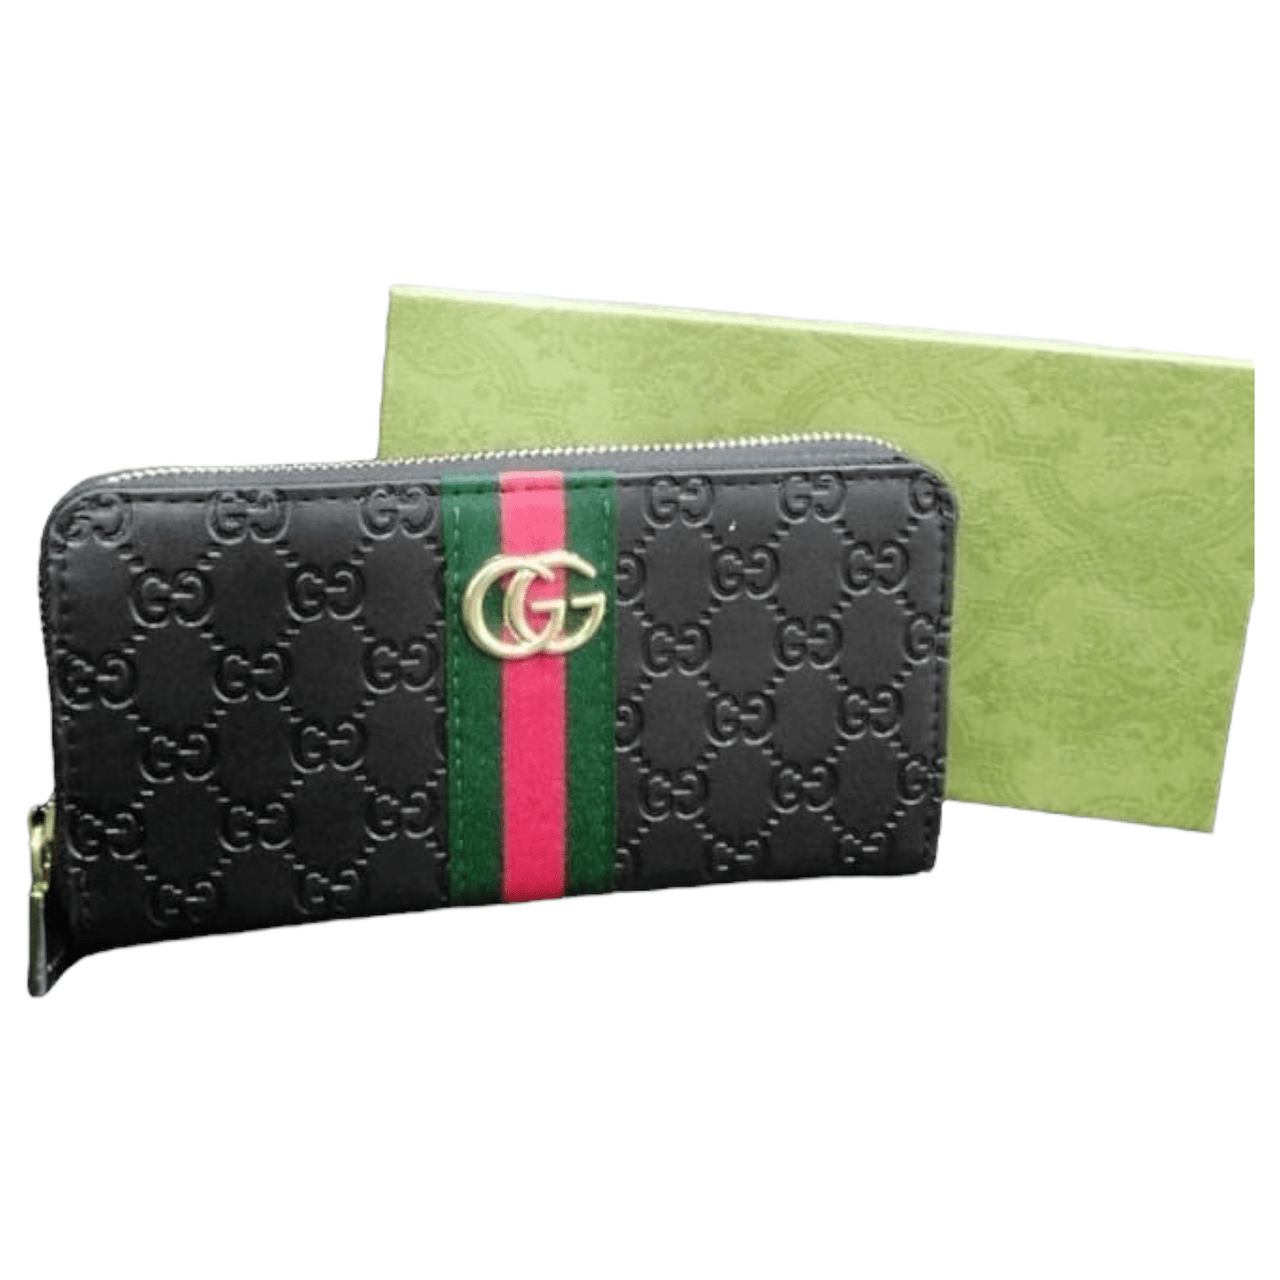 The Bag Couture Luggage & Bags Gucci Zip Wallet Classic Embossed Black